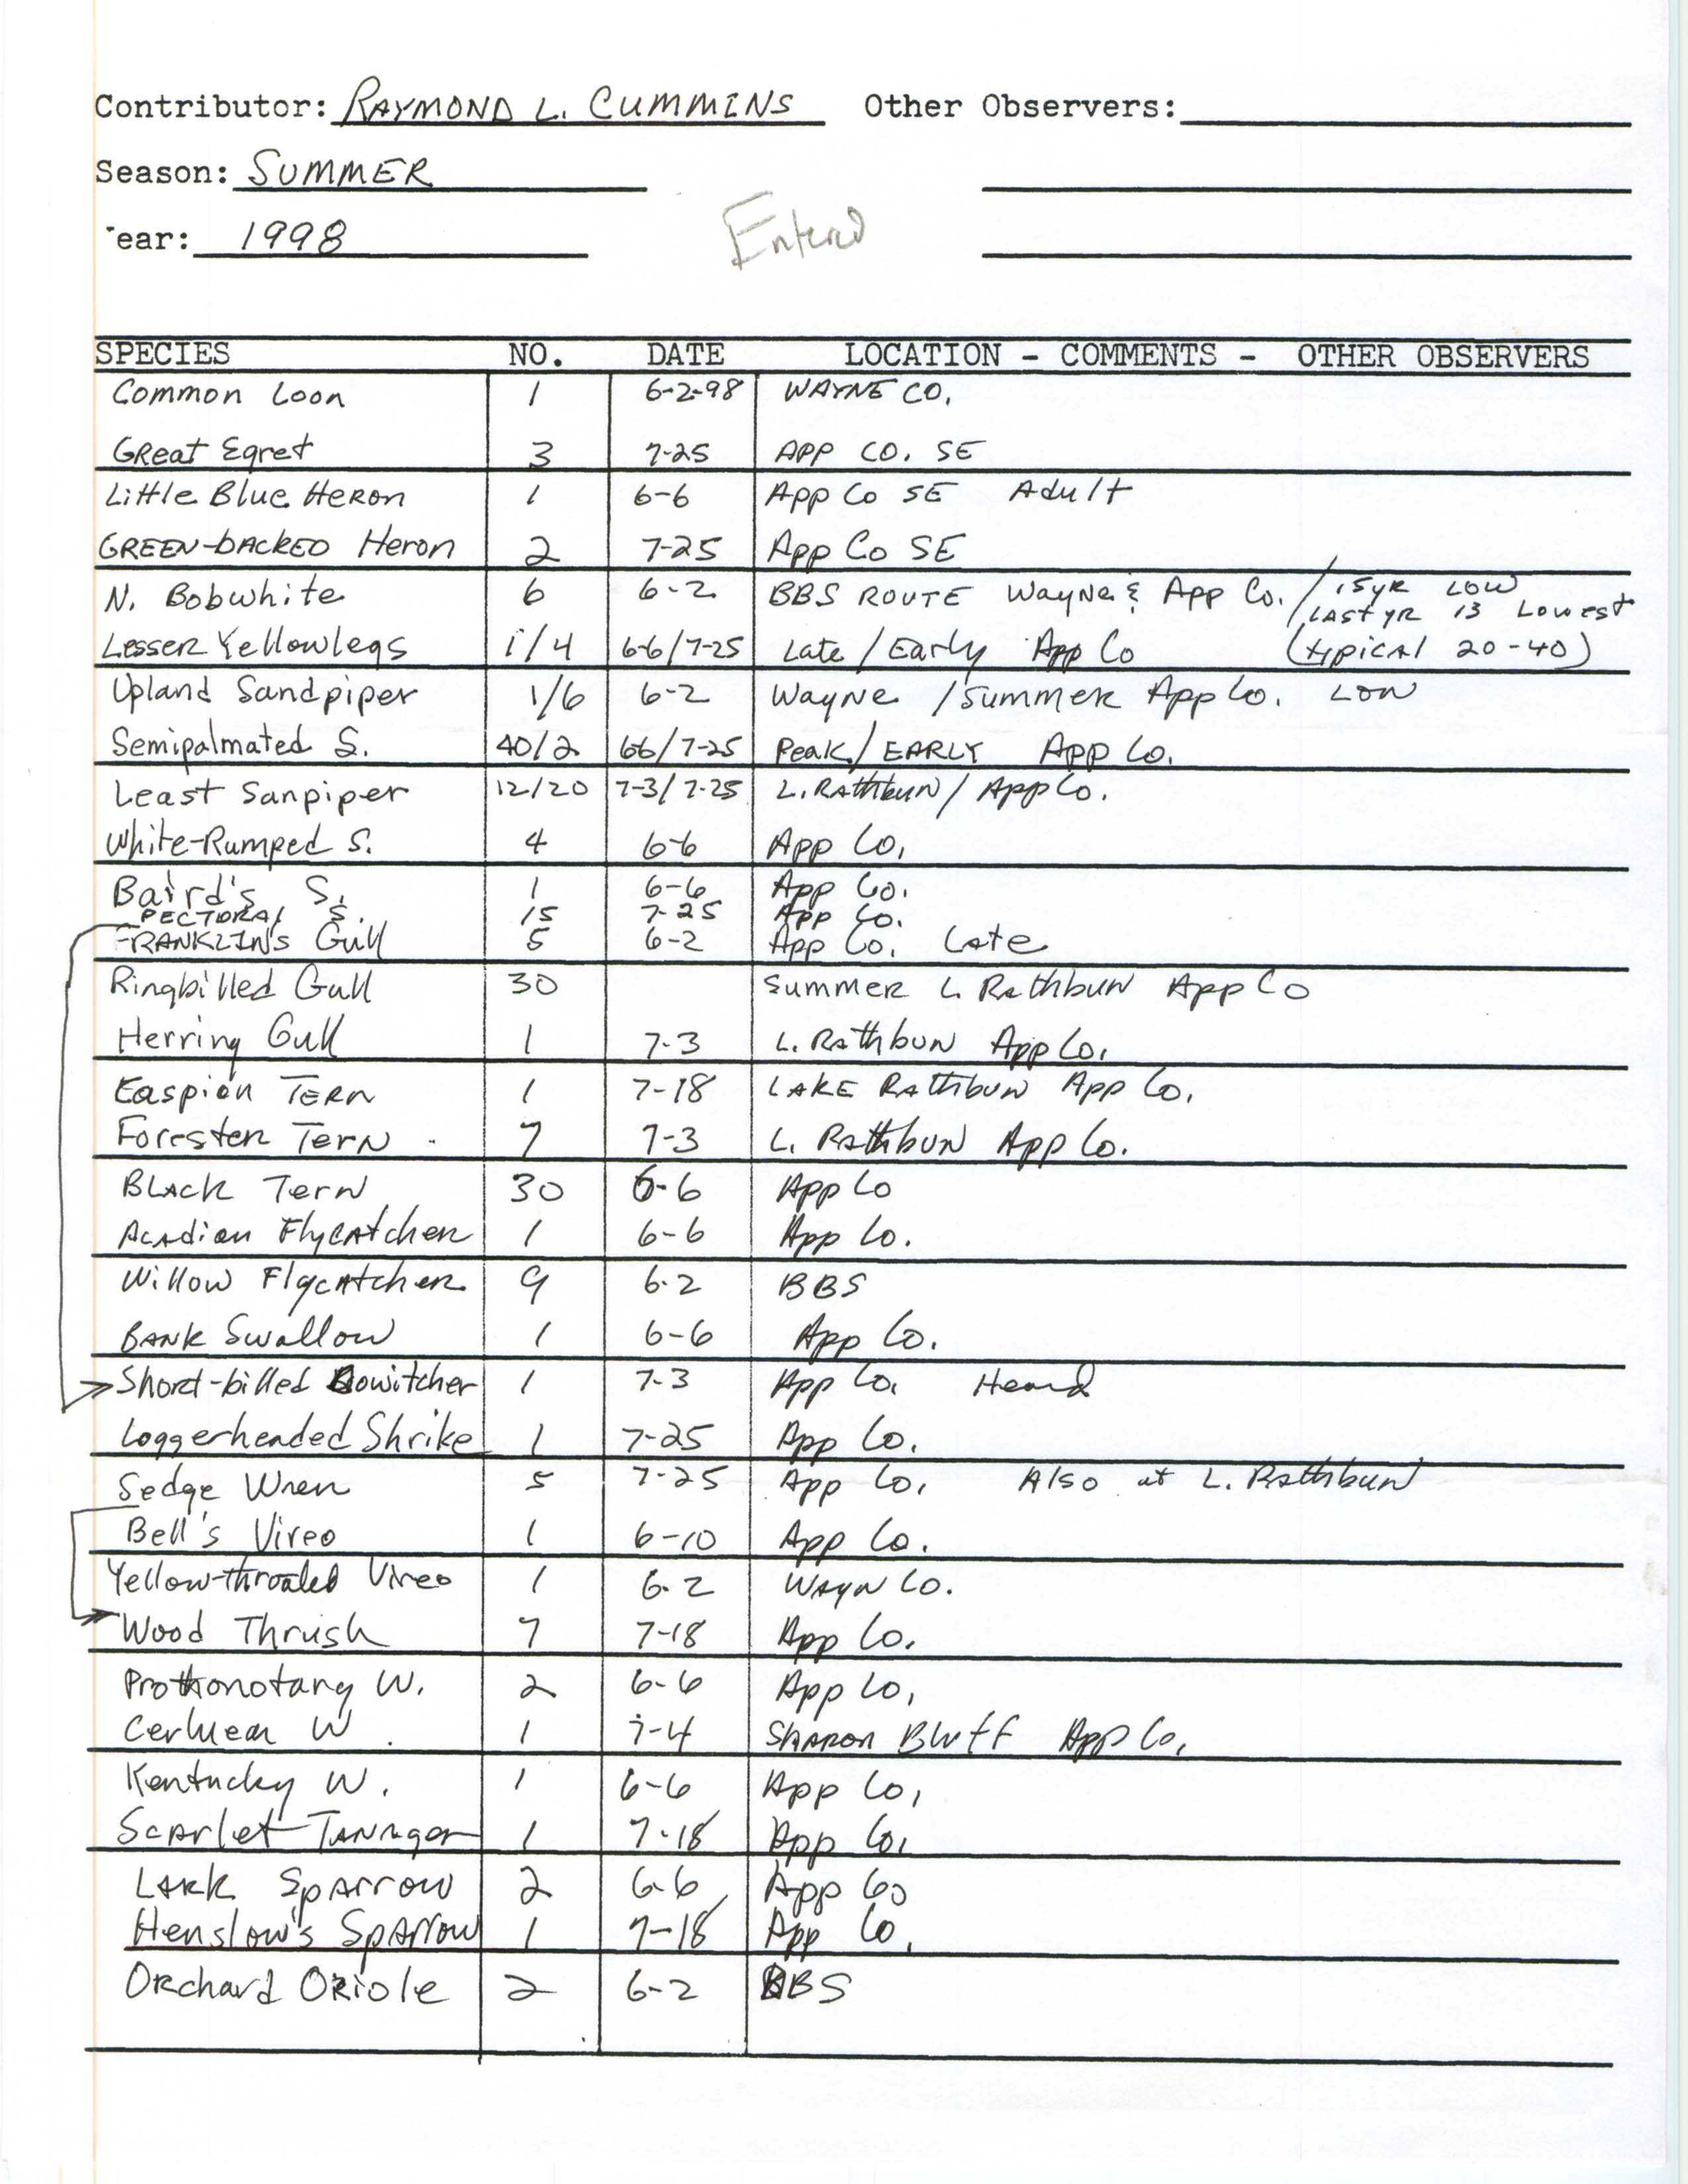 Annotated bird sighting list for summer 1998 compiled by Raymond Cummins